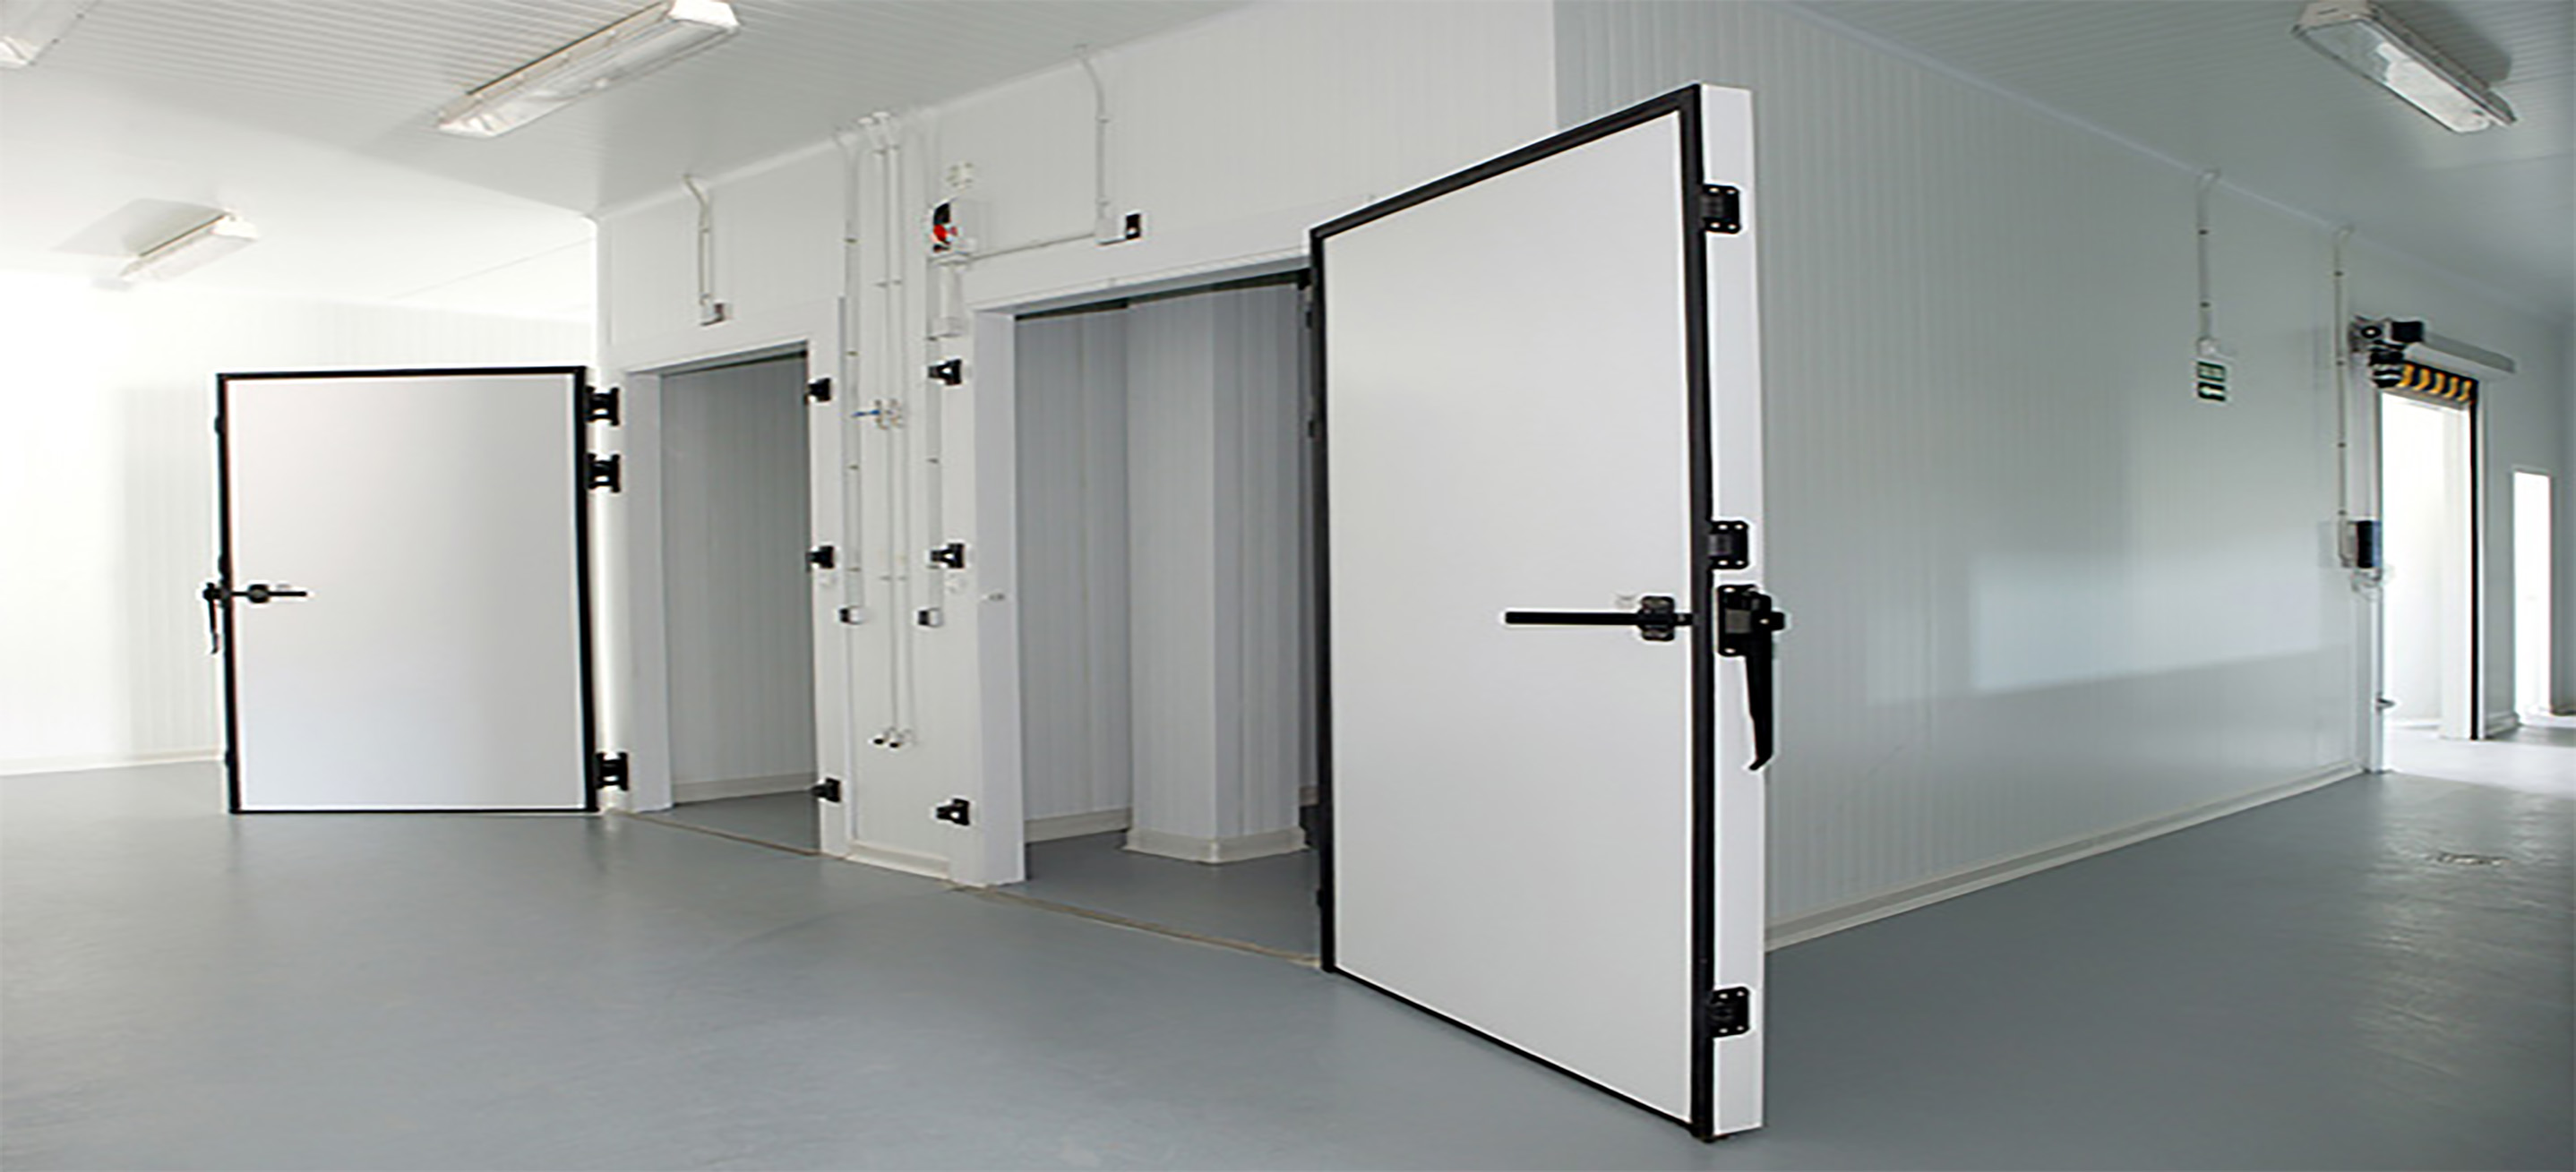 Two large cold room doors opened wide